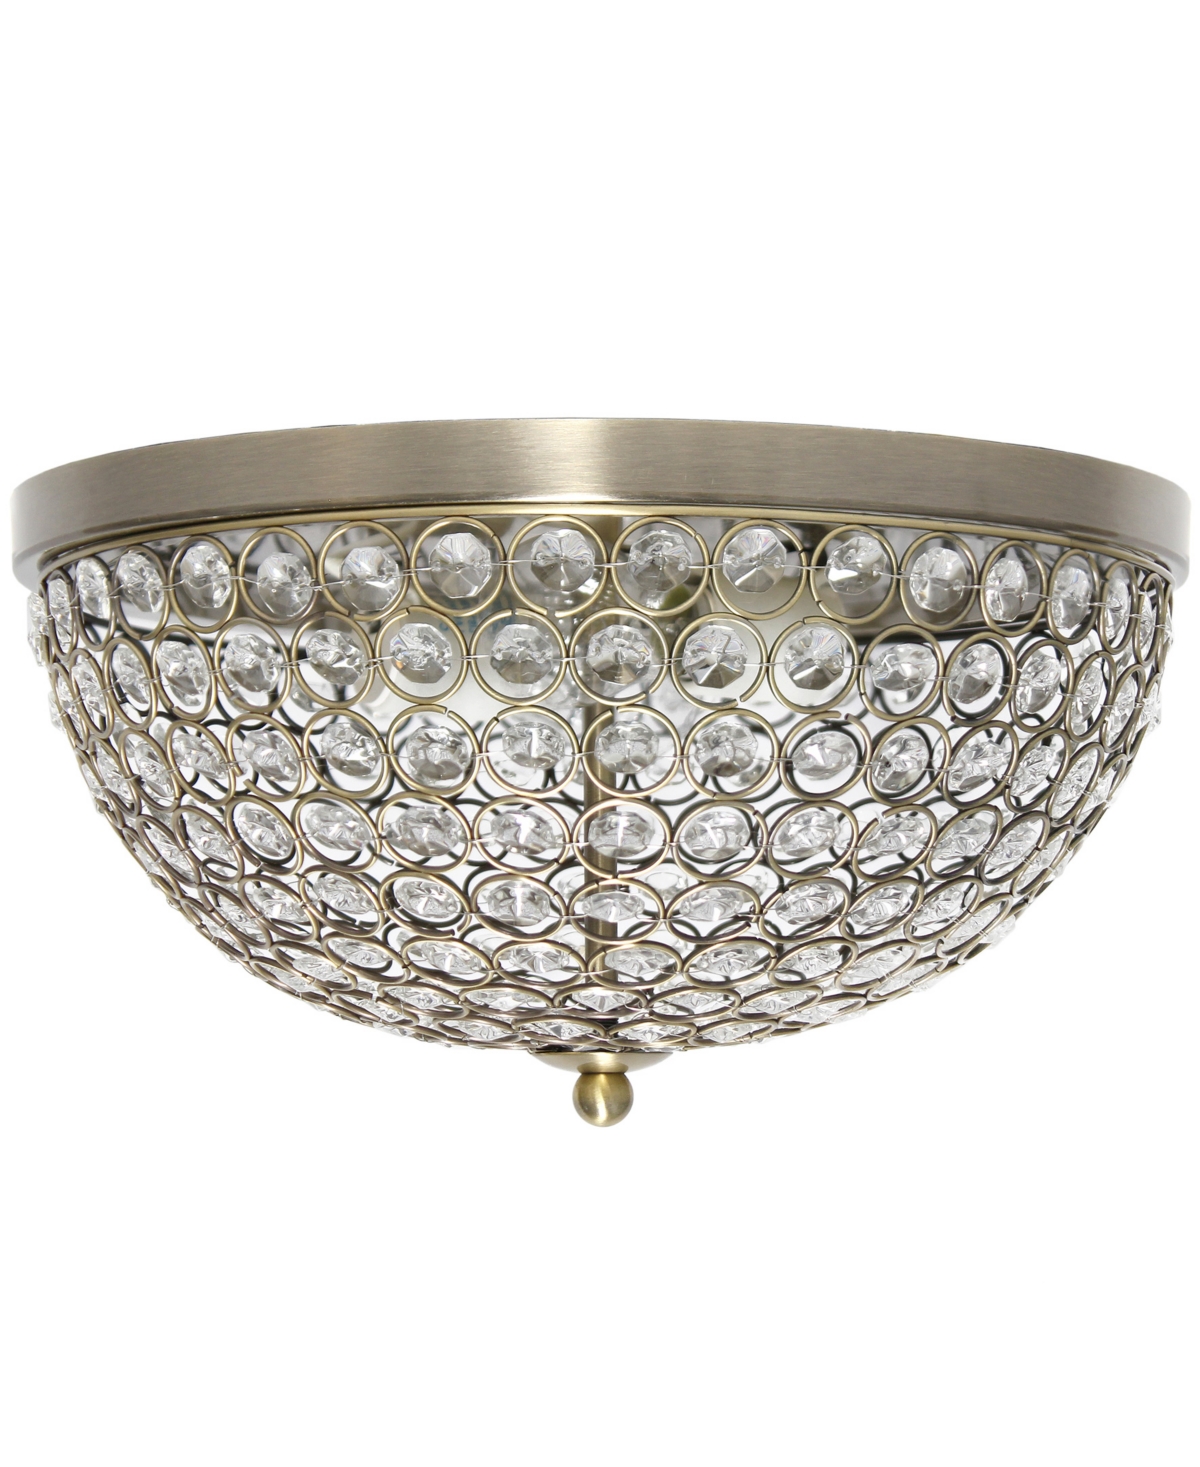 Shop Lalia Home 13" Classix Crystal Glam Two Light Decorative Dome Shaped Metal Flush Mount Ceiling Fixture In Antique Brass